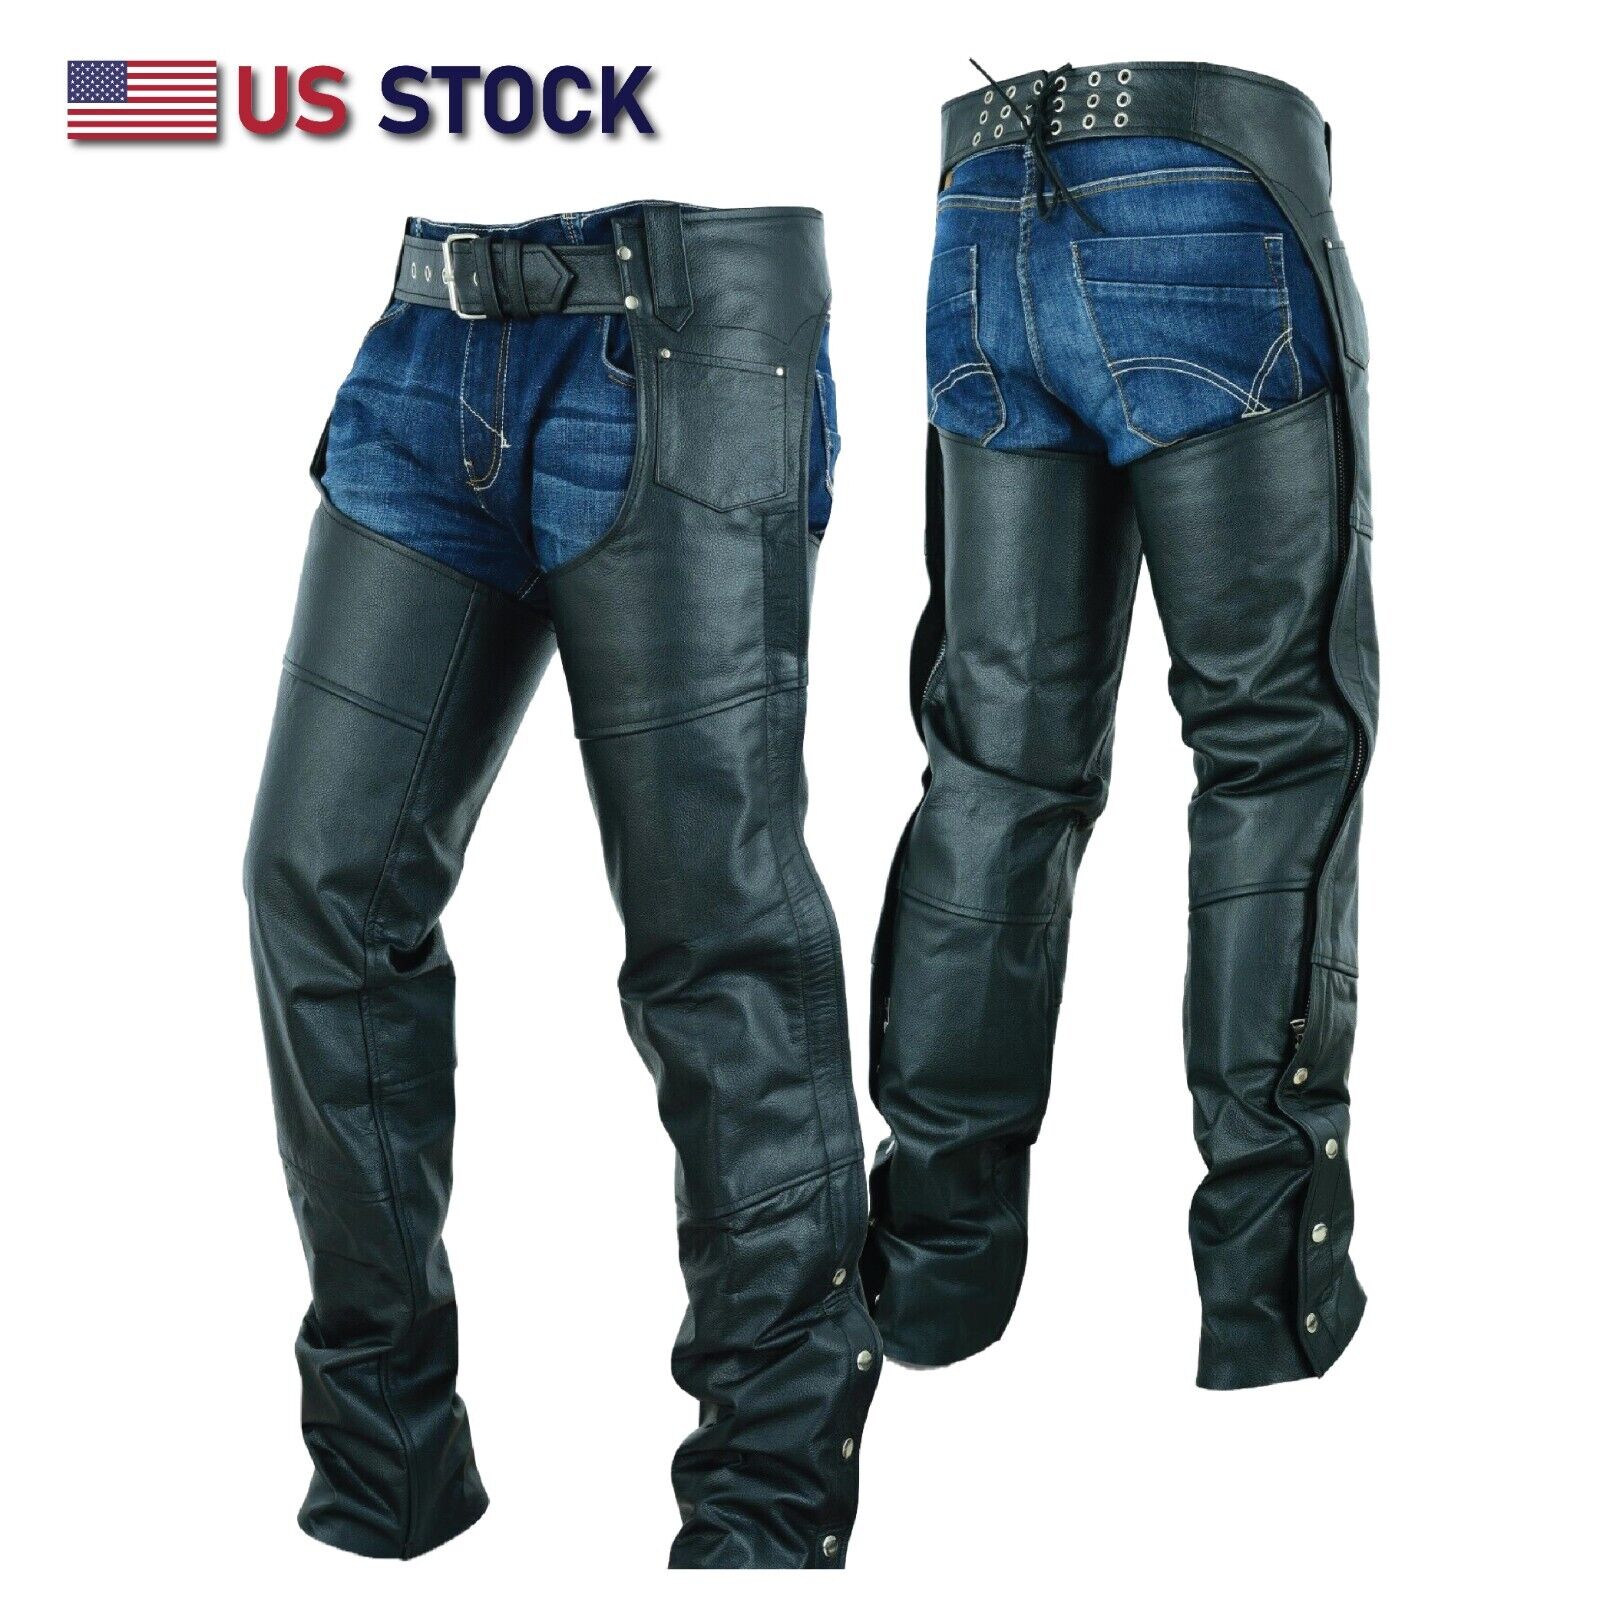 Highway Leather Lined Chaps Motorcycle Riding Bikers Chap Black SKU # HL12800SPT